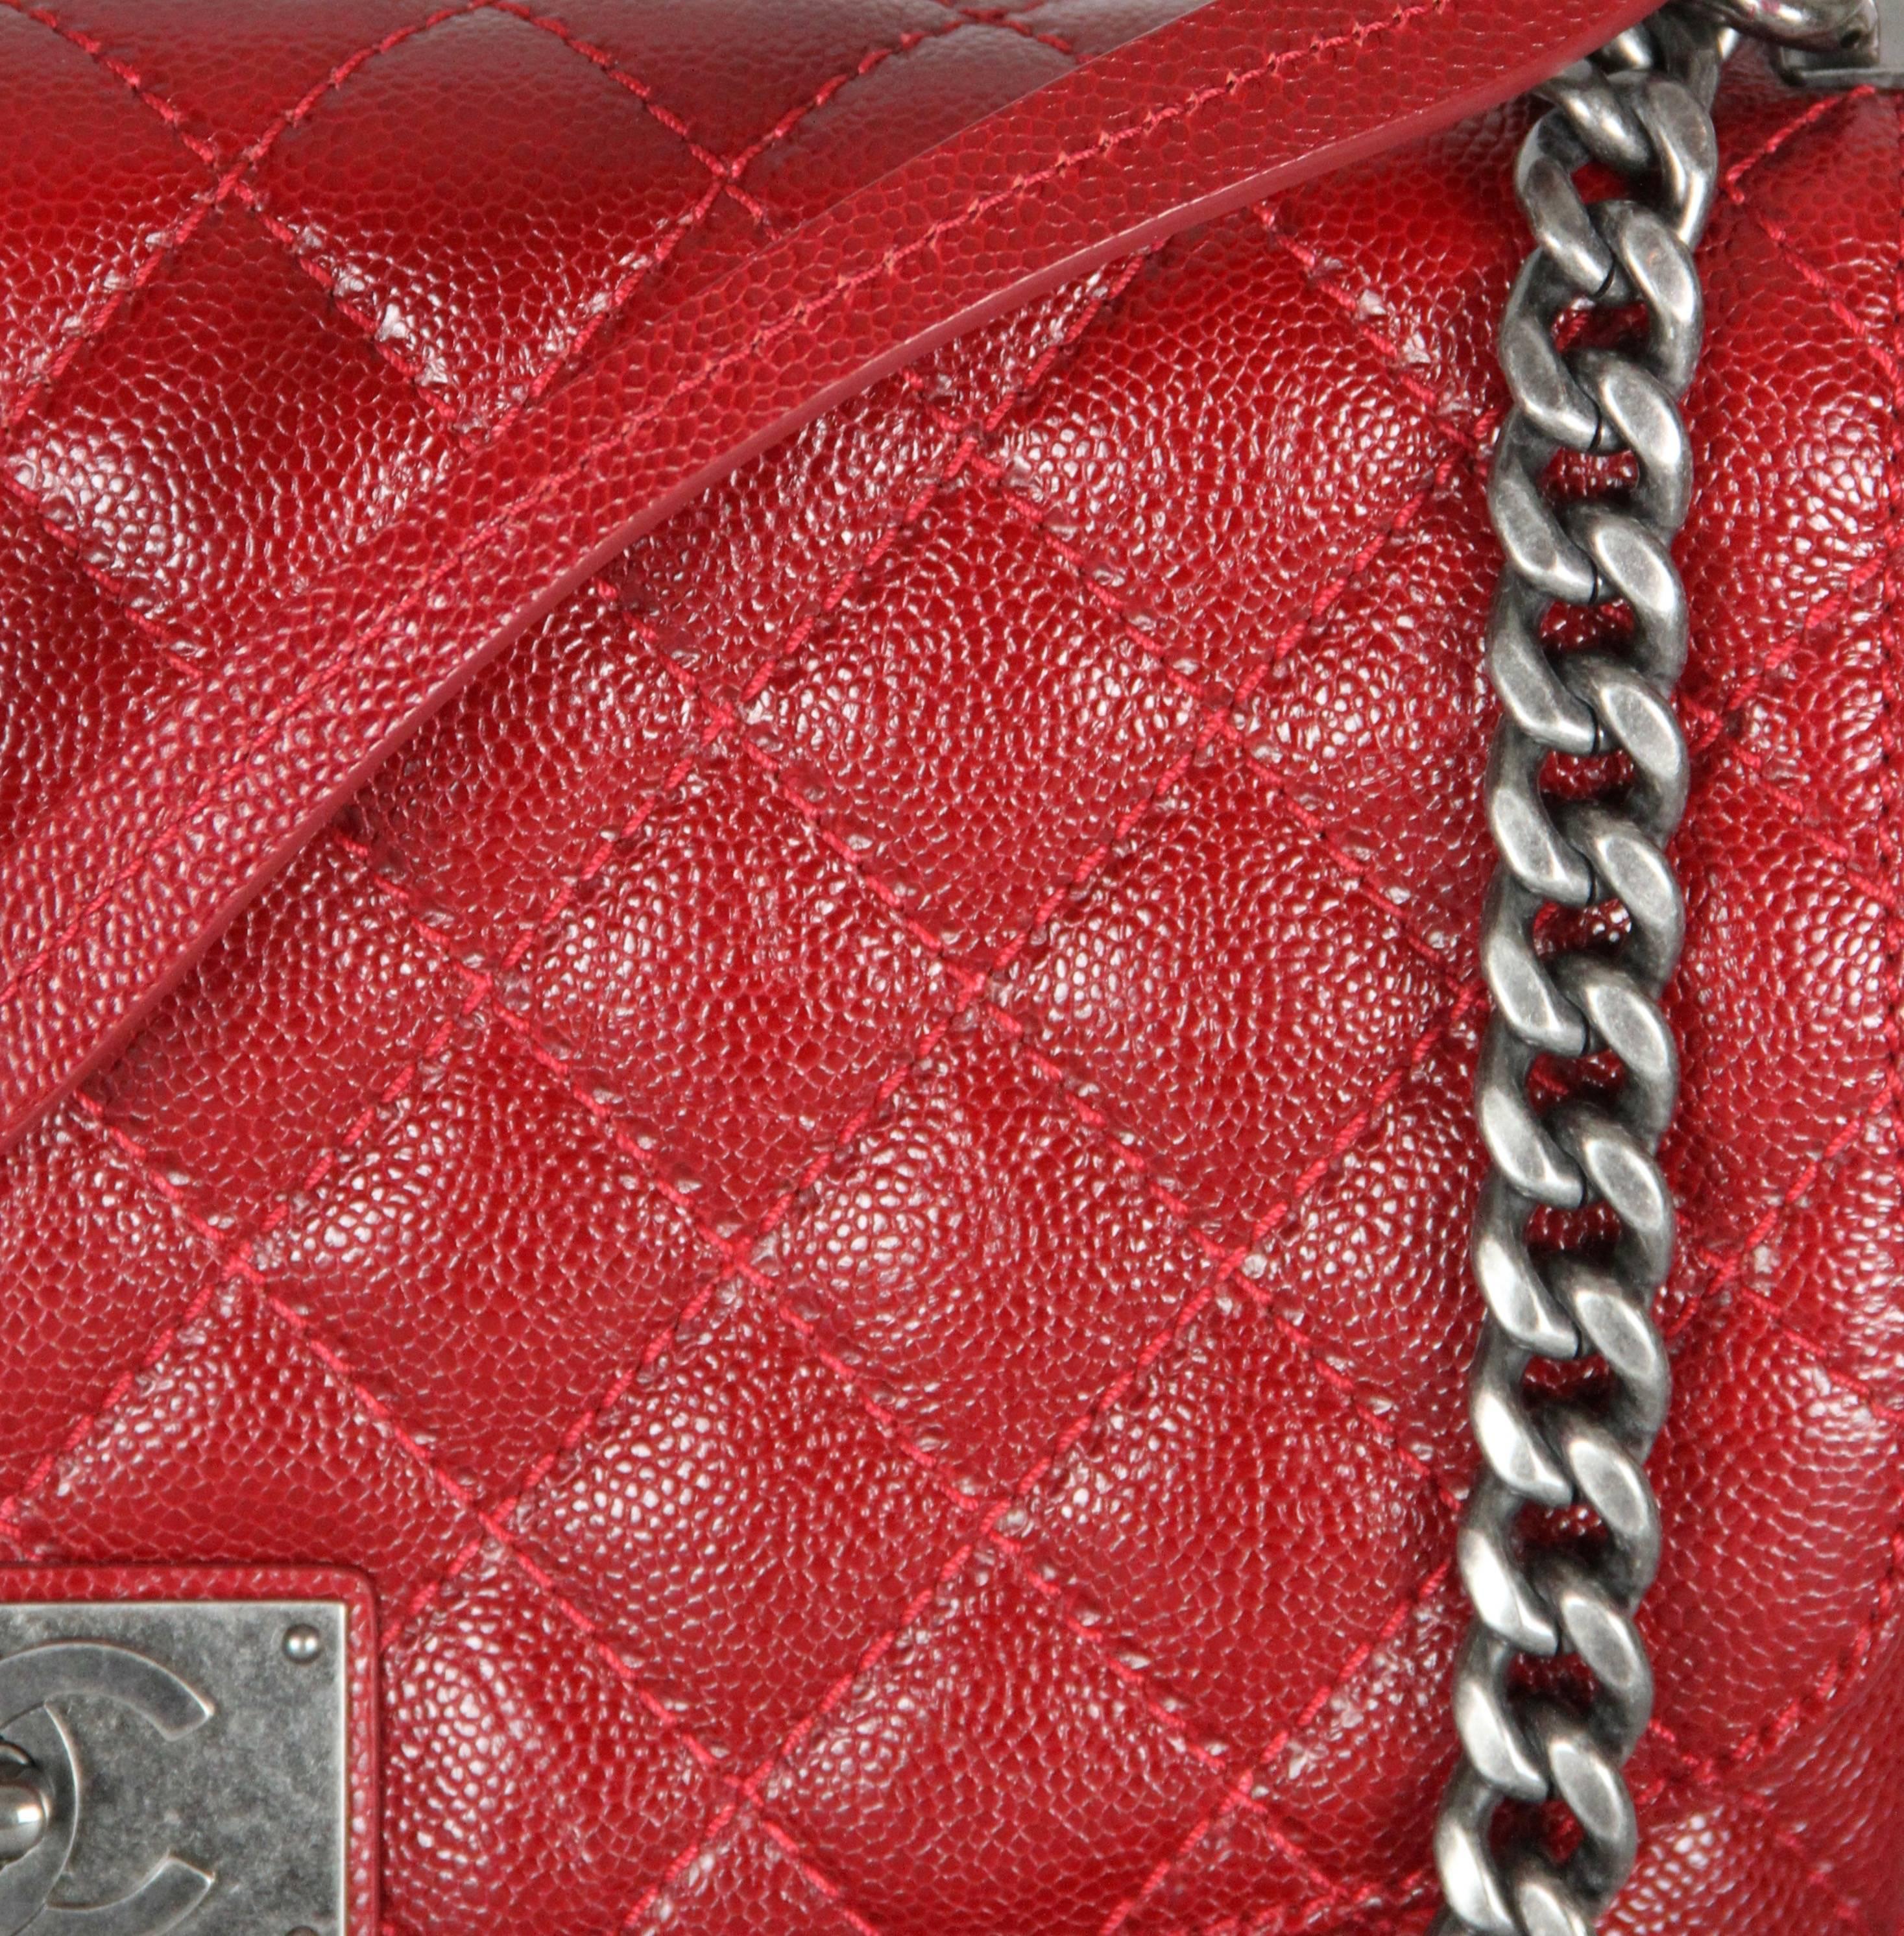  CHANEL Shiny Red Grained Leather Messenger Bag  2